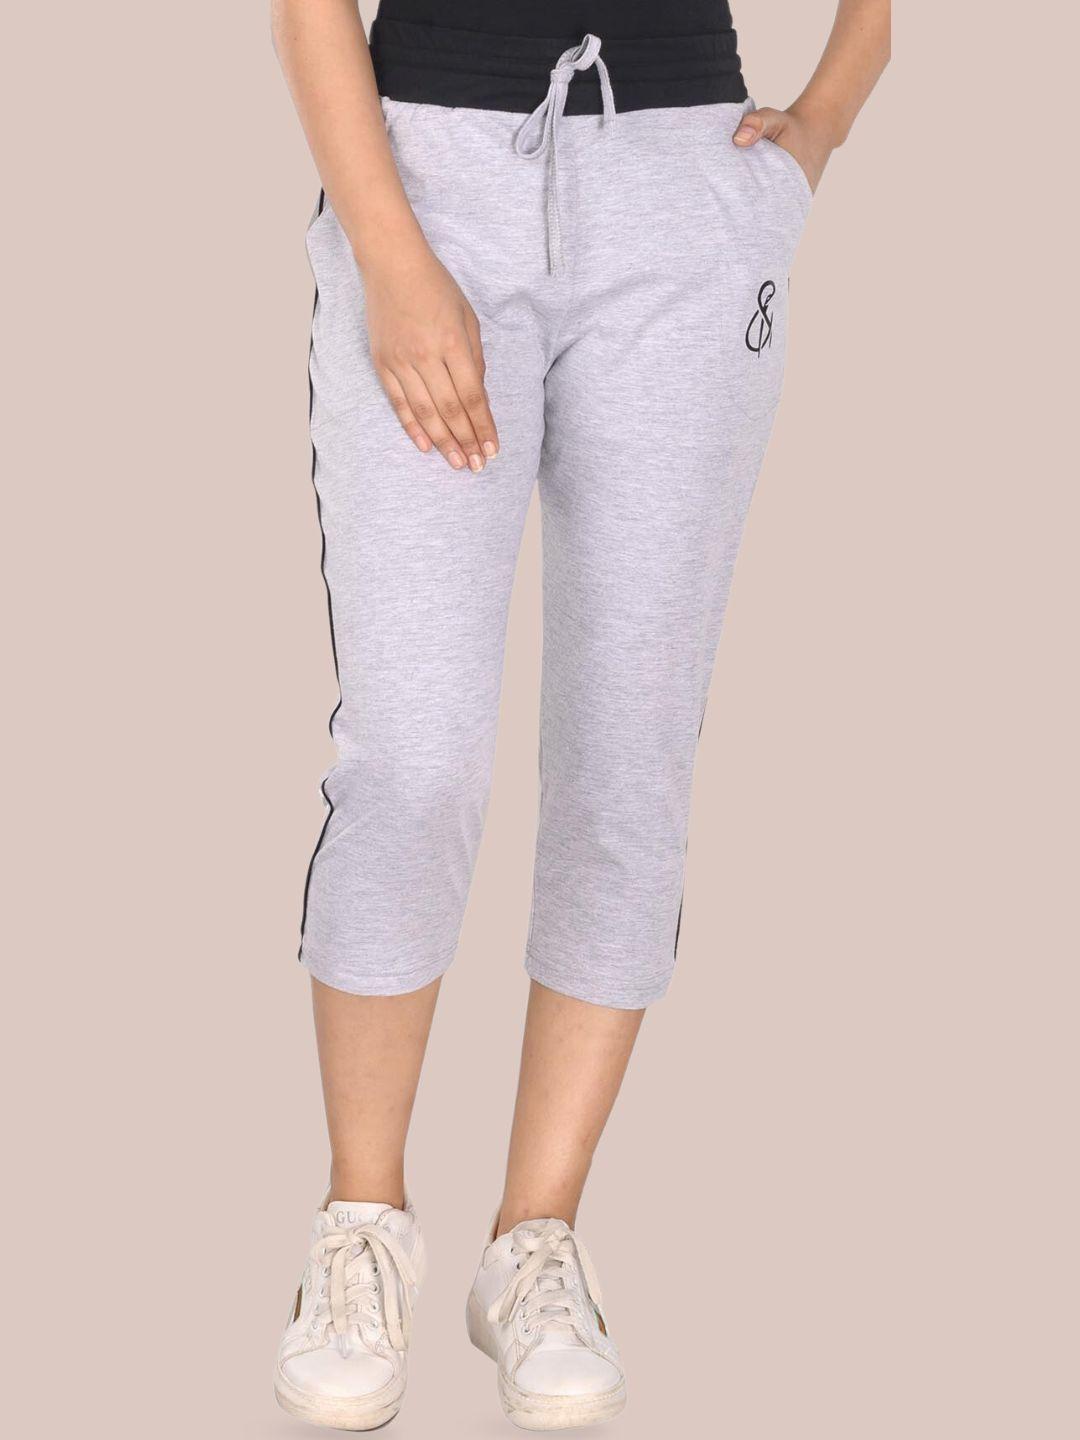 styleaone solid pure cotton capris